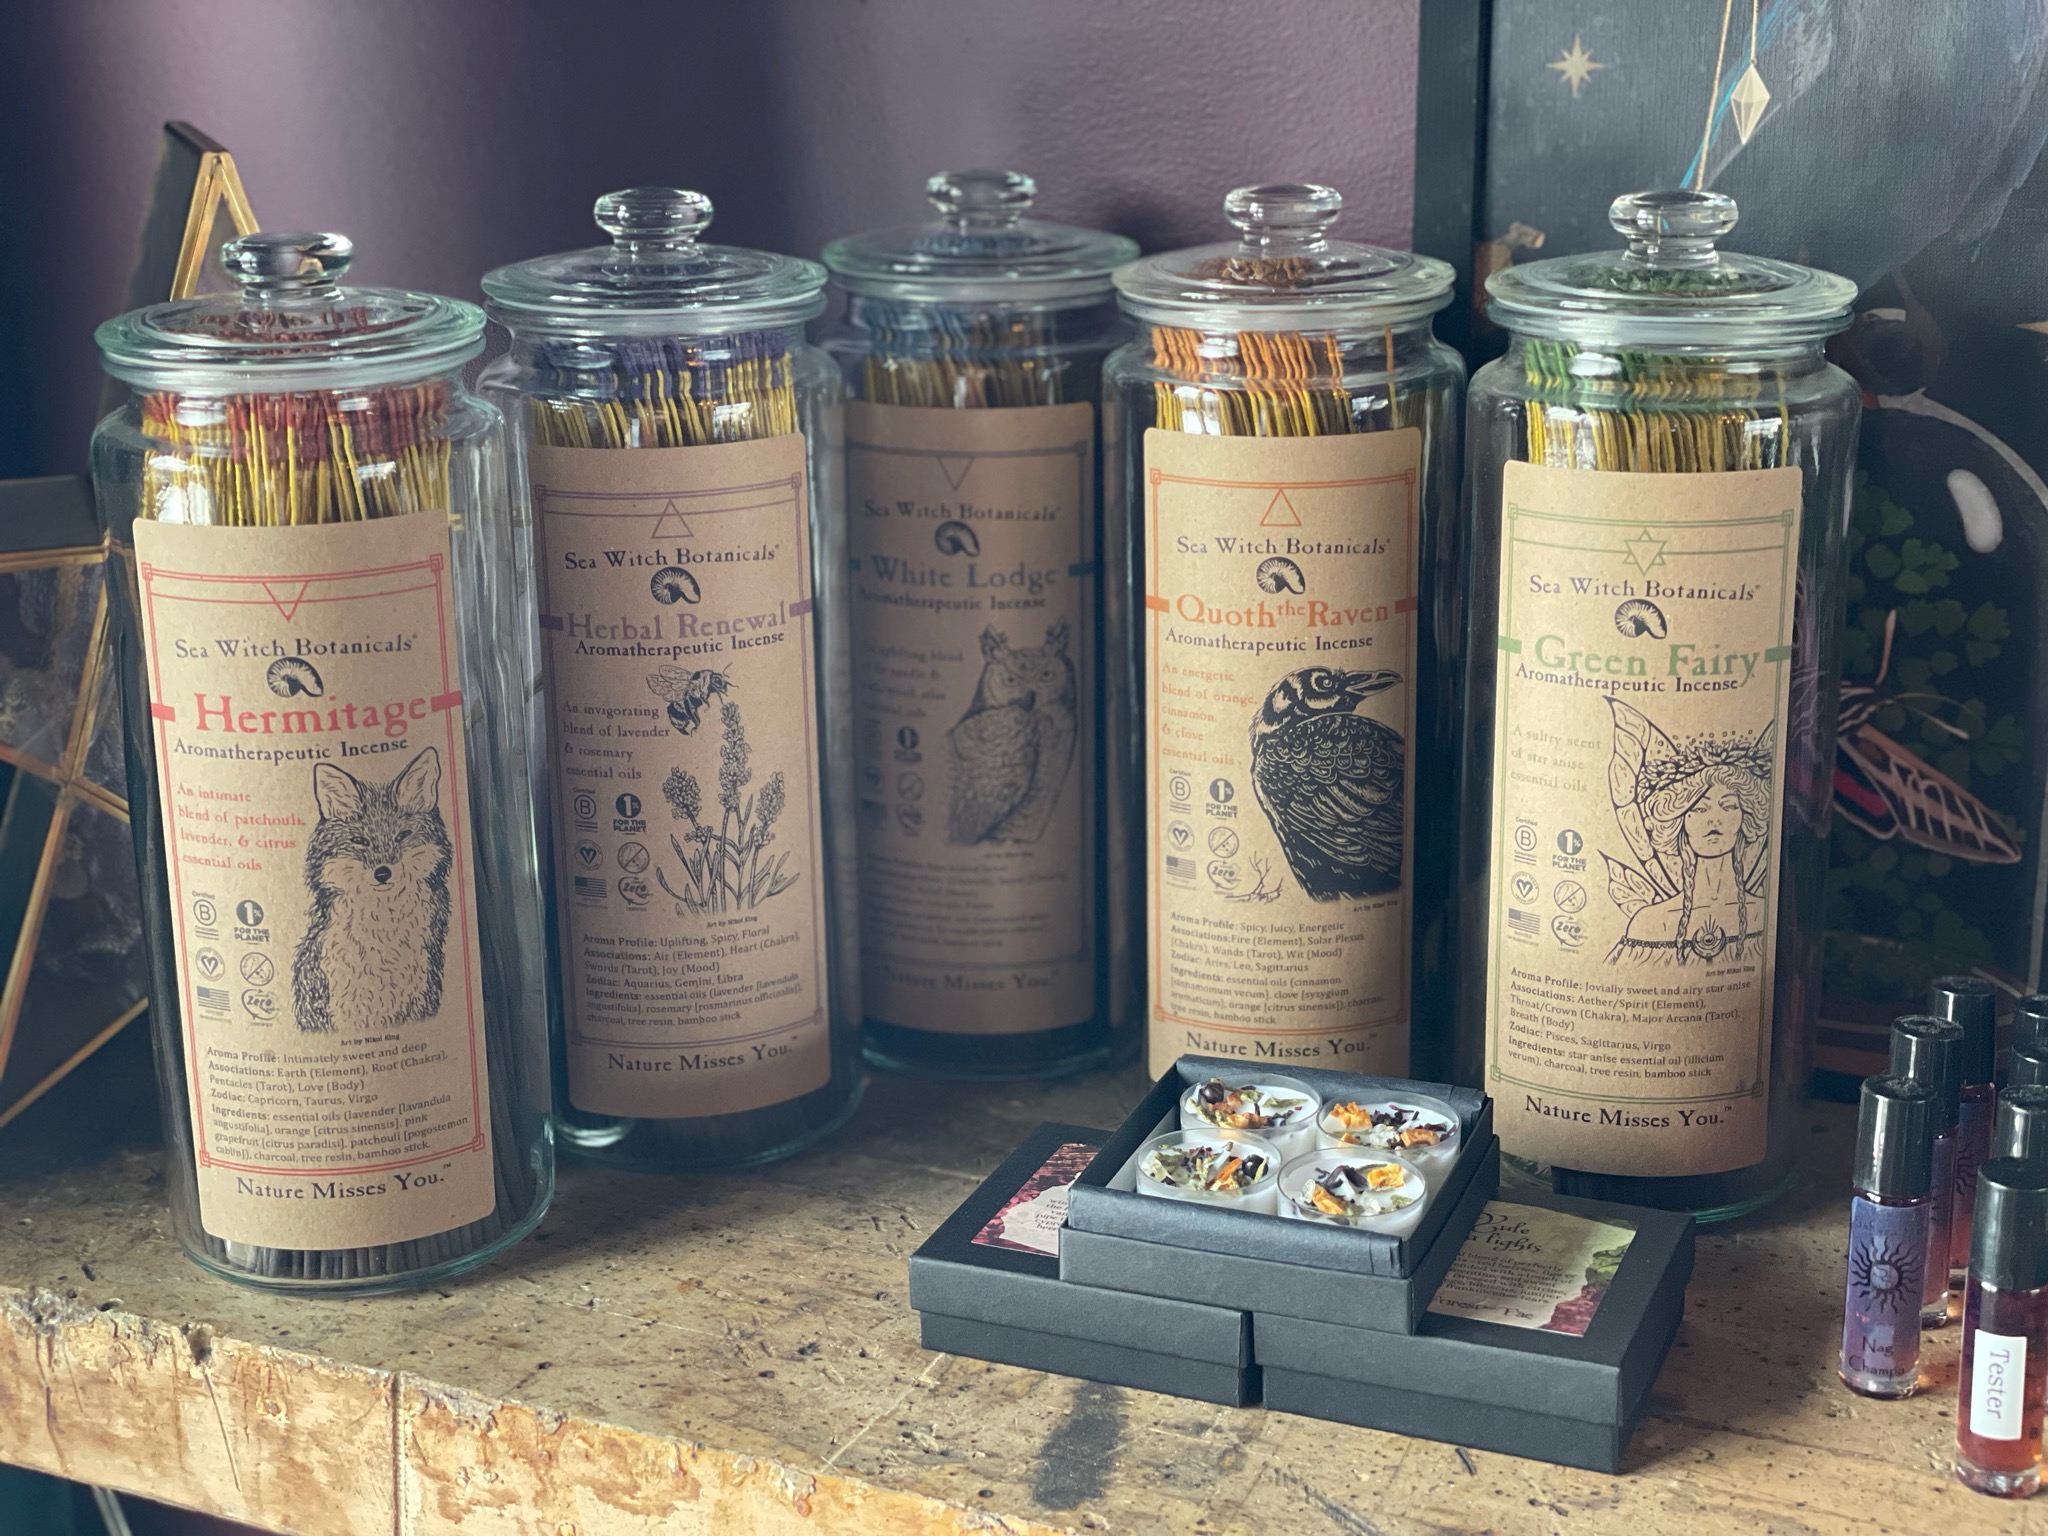 Apothecary Image 1